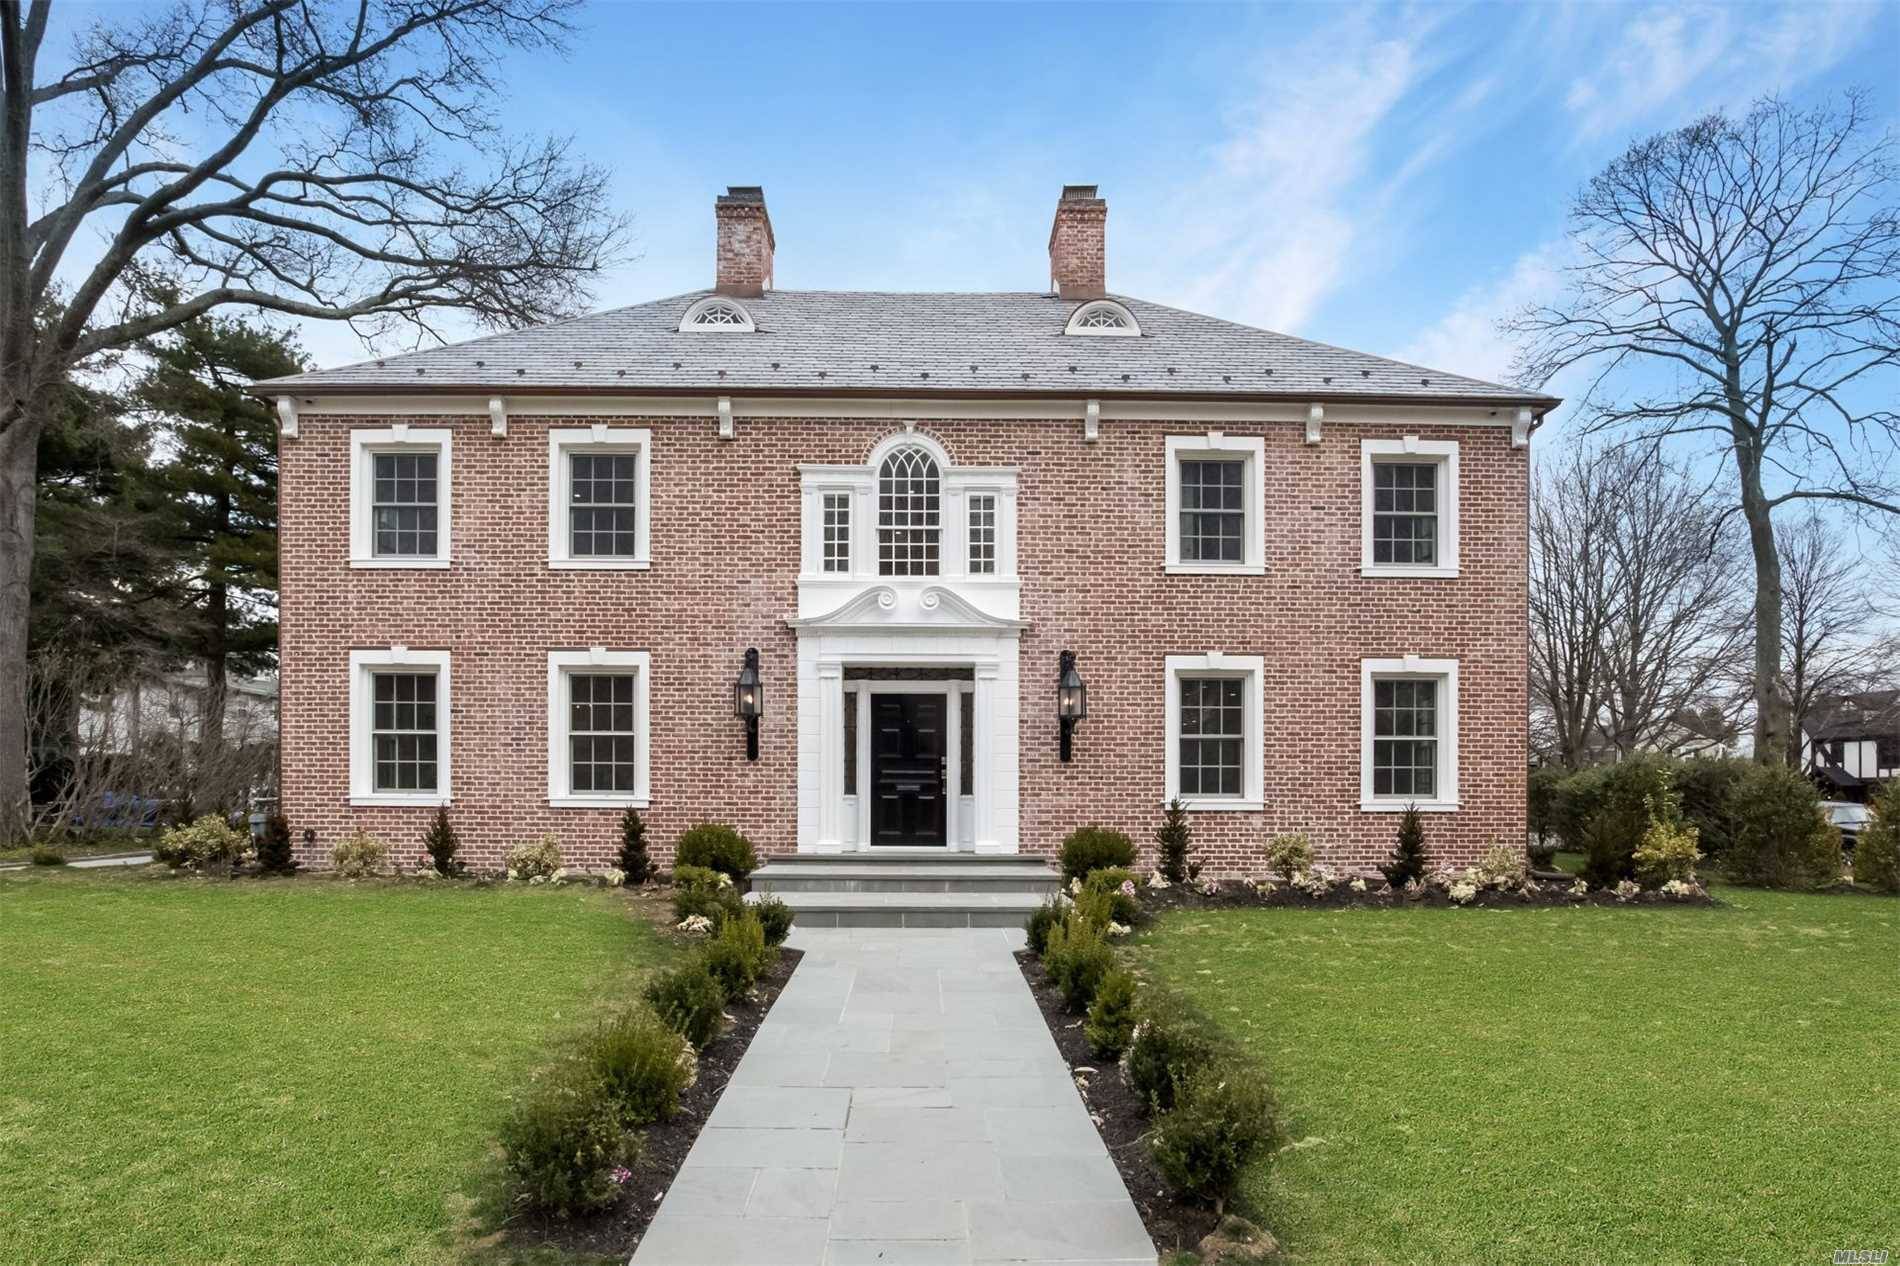 Great Mini Mansion Property Description:Elegant Georgian Colonial Completely Renovated With Luxury Appointments.